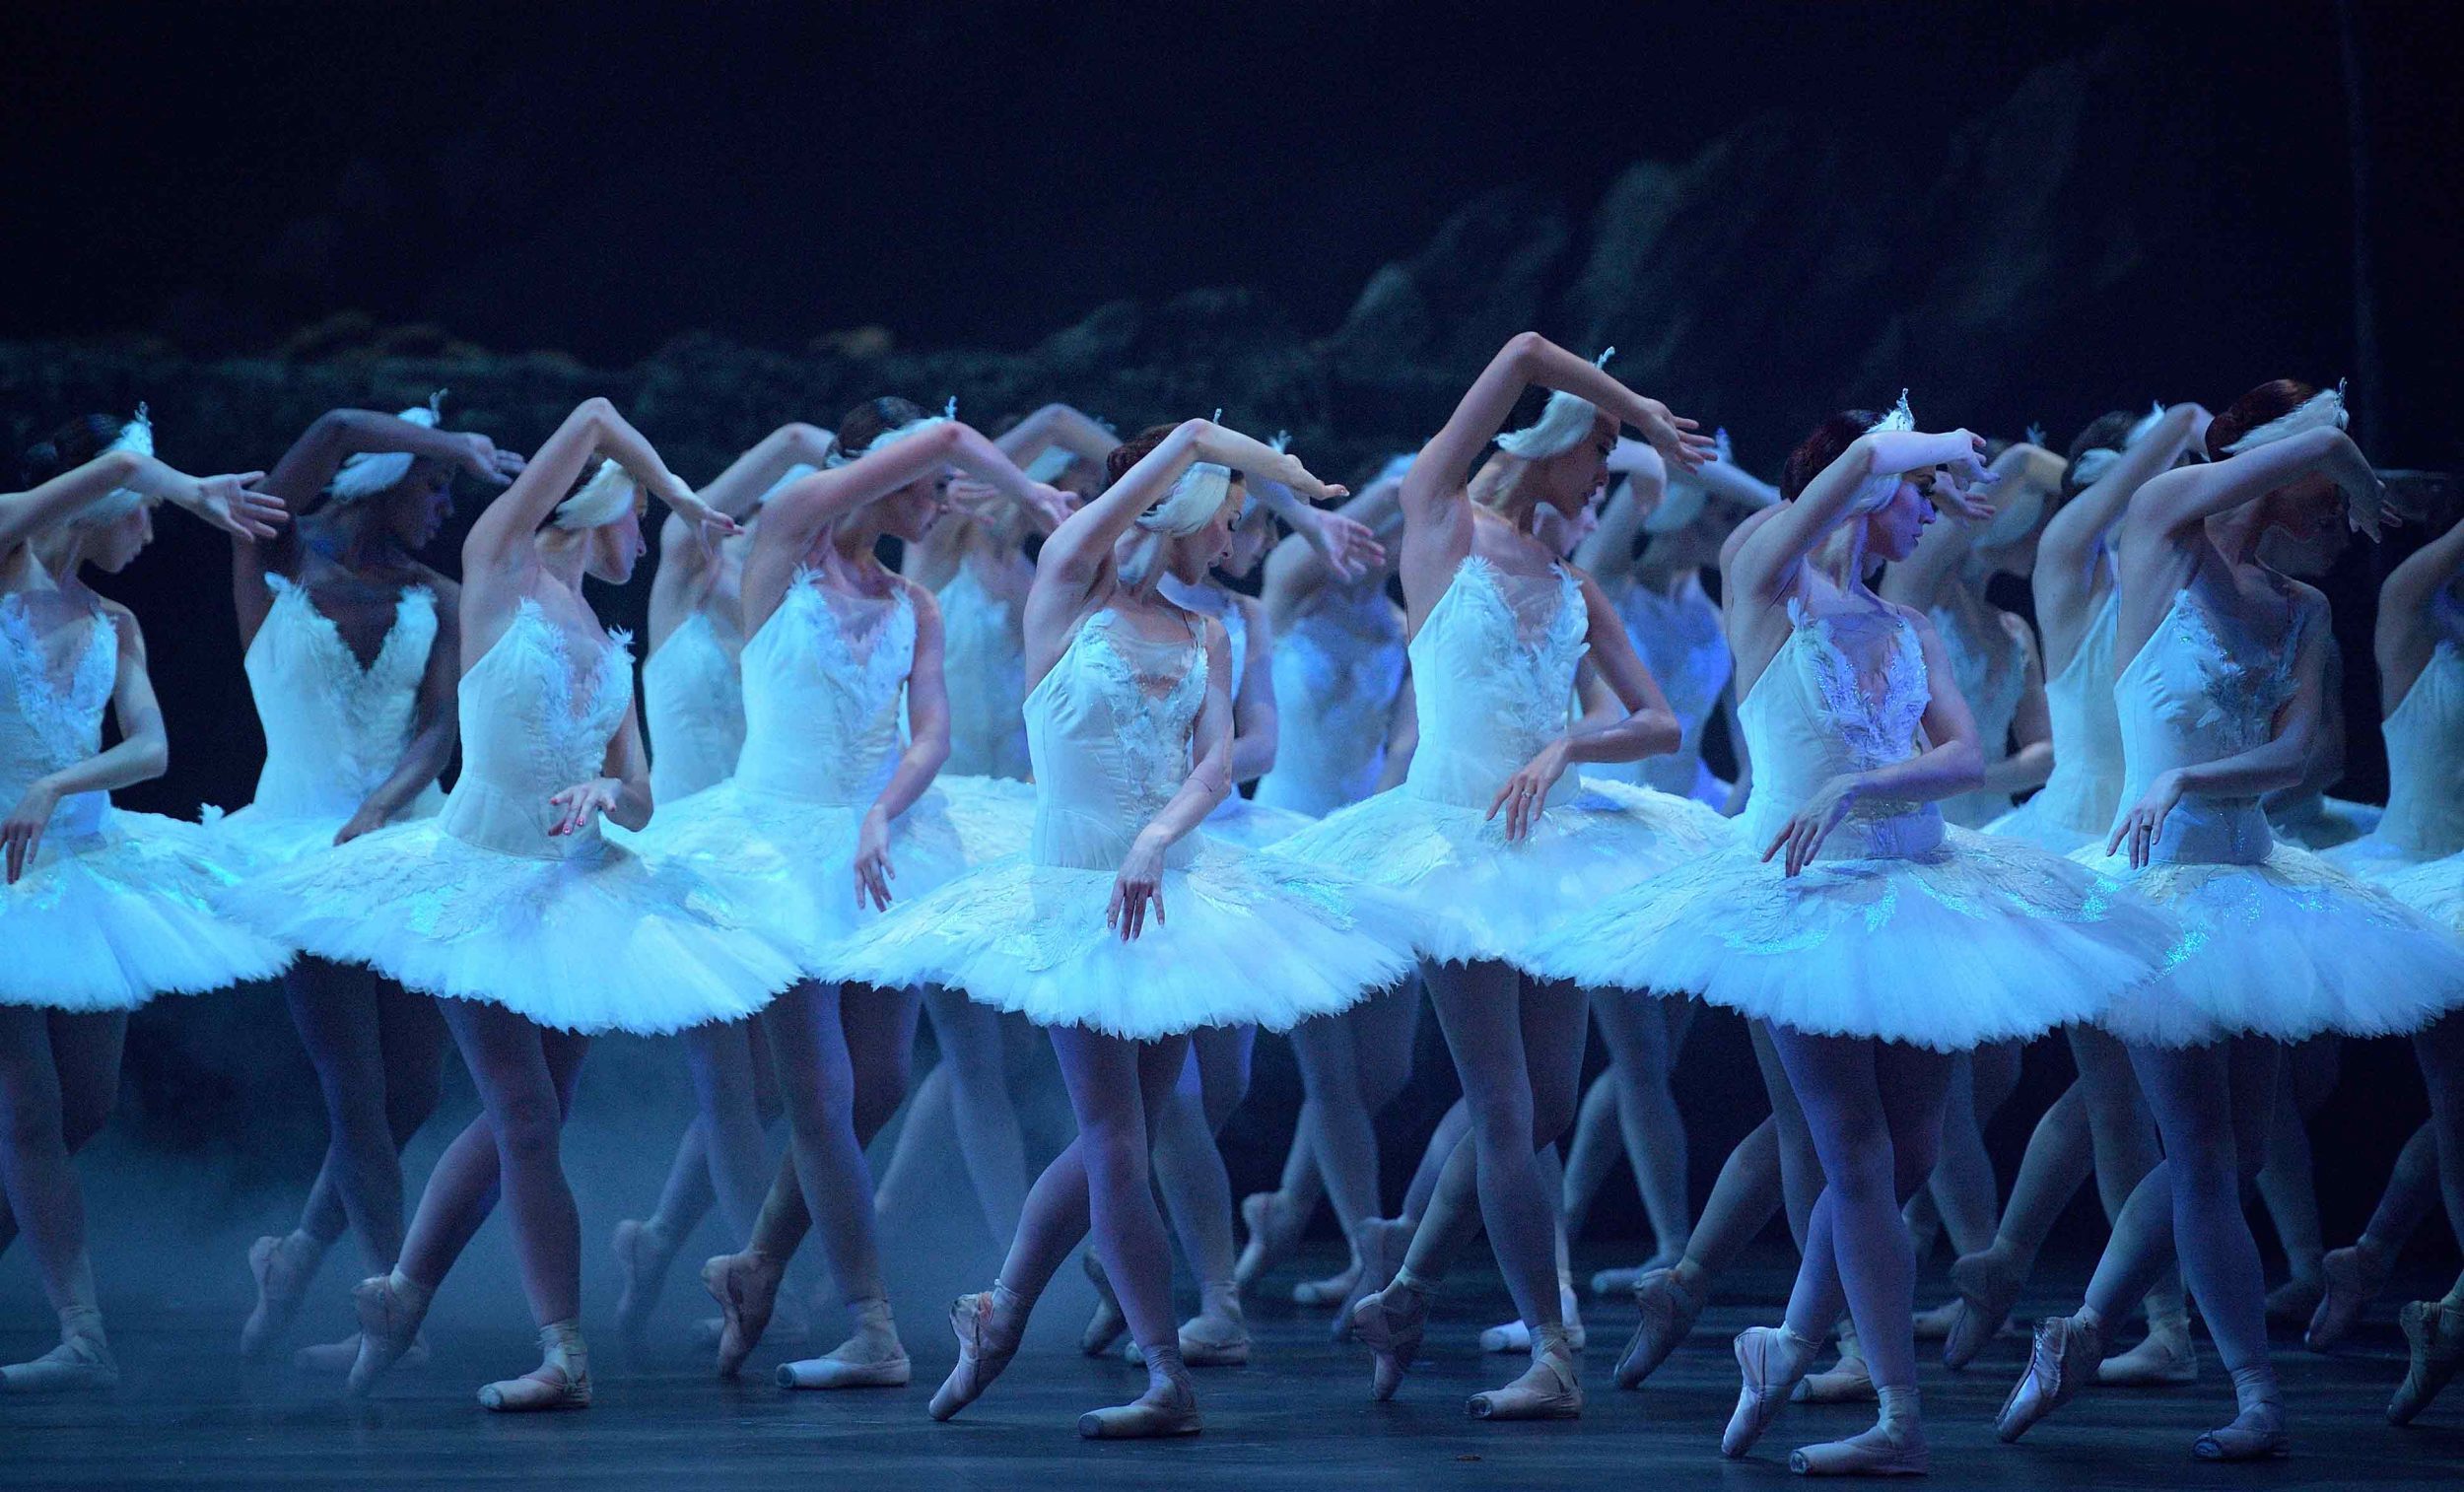 English National Ballet streaming 'Swan Lake' for for the next hours